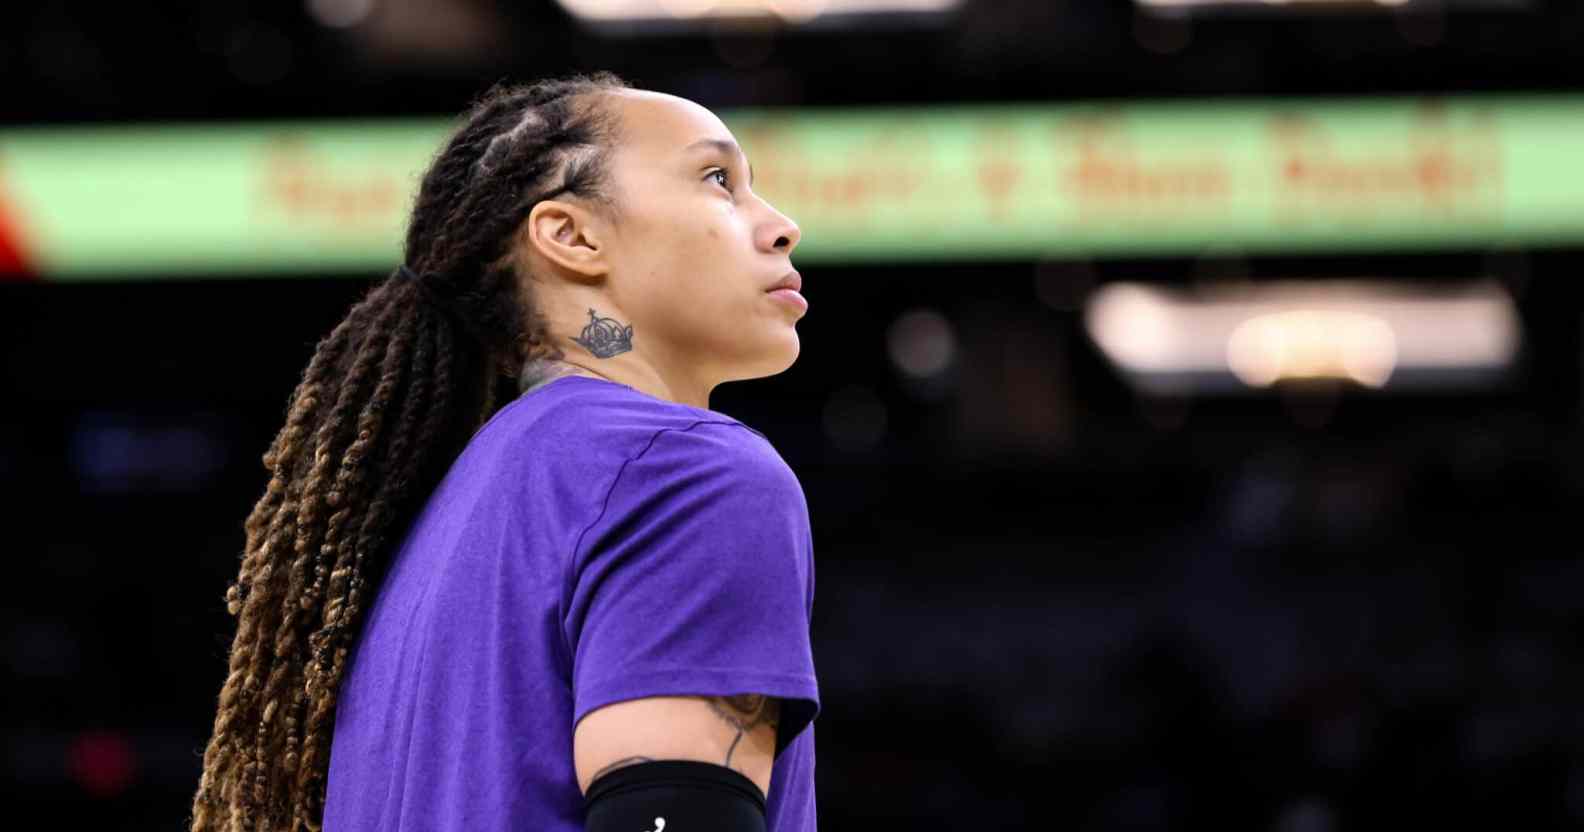 Brittney Griner look up during a basketball match